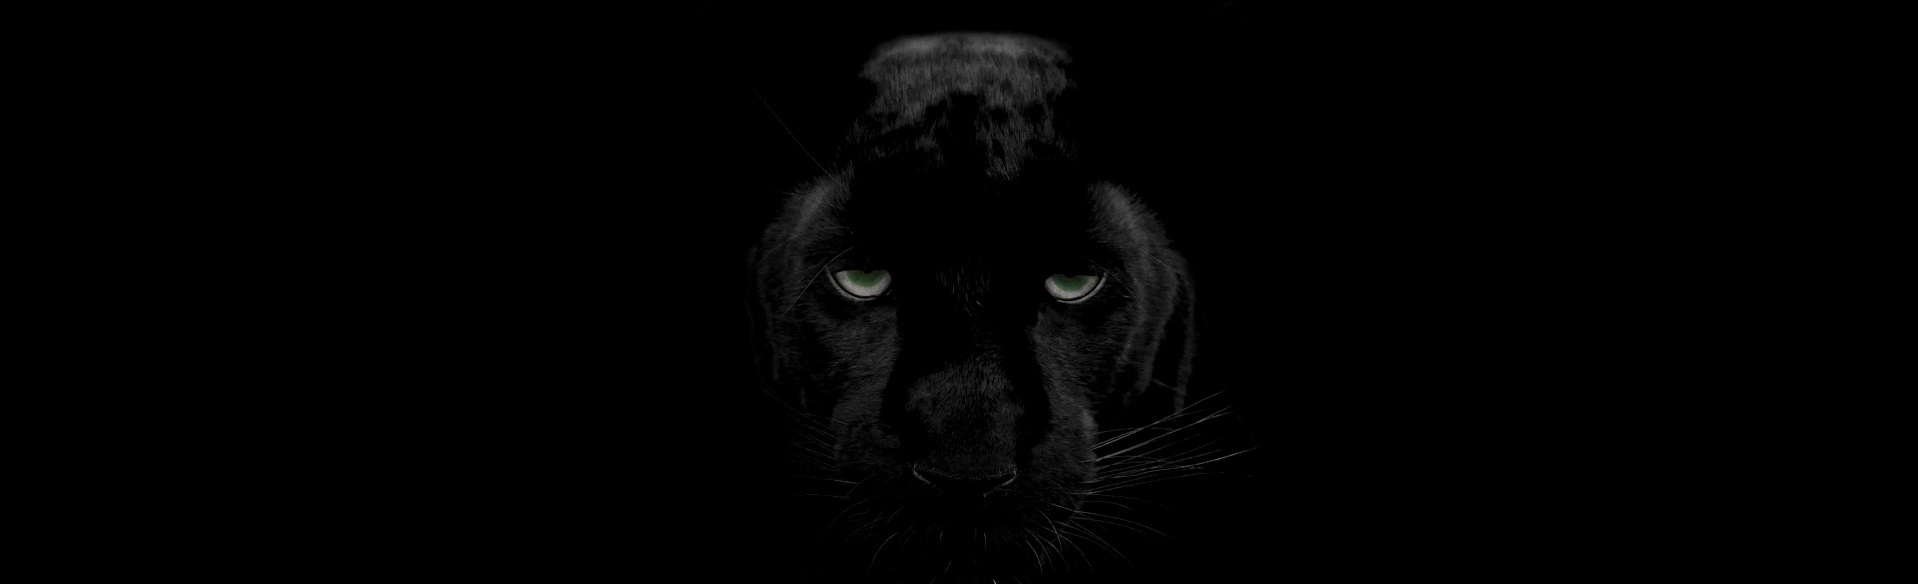 panther HD wallpapers, backgrounds